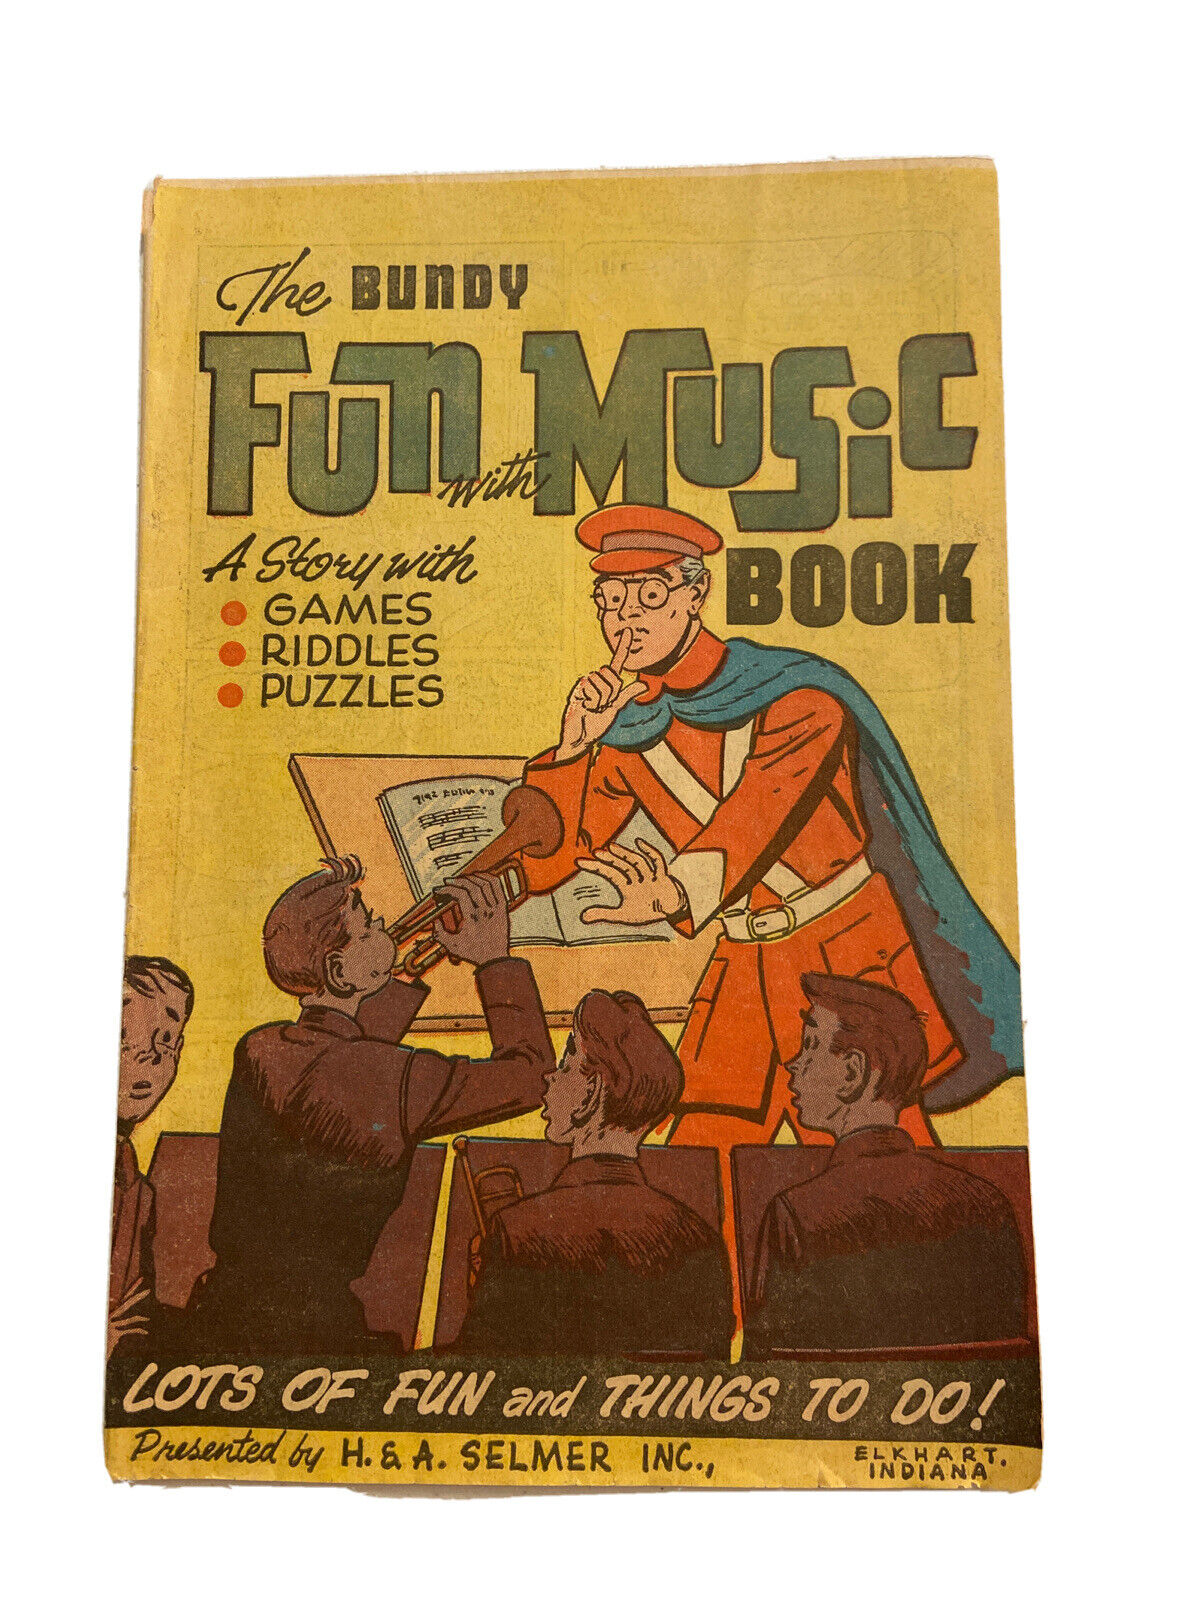 Vintage 1962 The Bundy Fun with Music Book, by H. & A. Seller Inc. Elkhart, IN